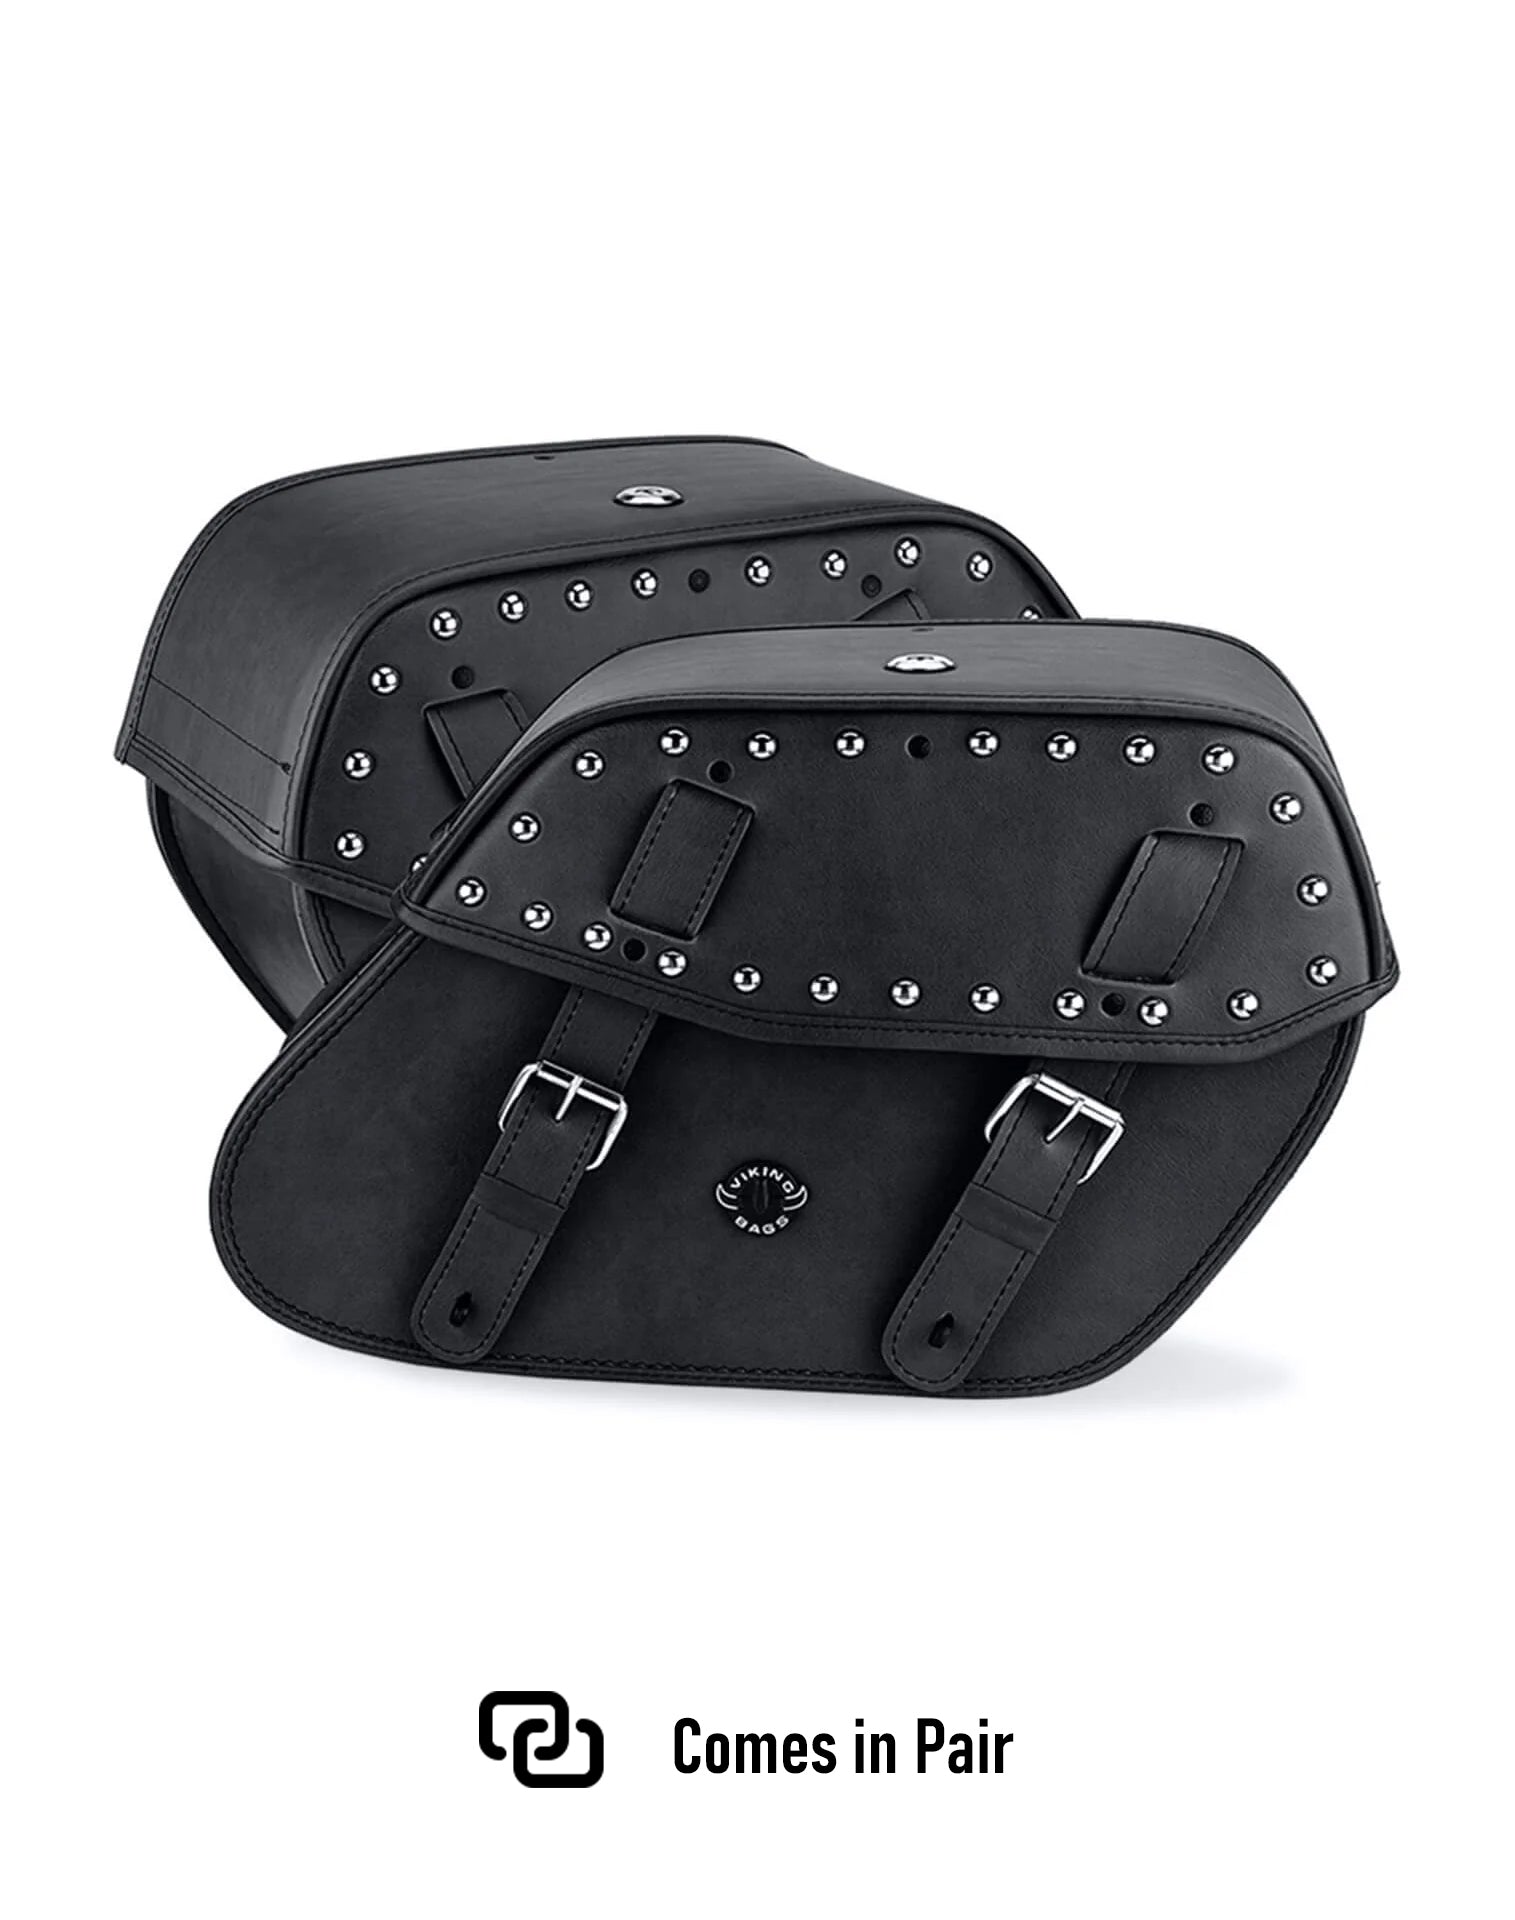 Viking Odin Large Studded Leather Motorcycle Saddlebags For Harley Softail Street Bob Fxbb Weather Resistant Bags Comes in Pair